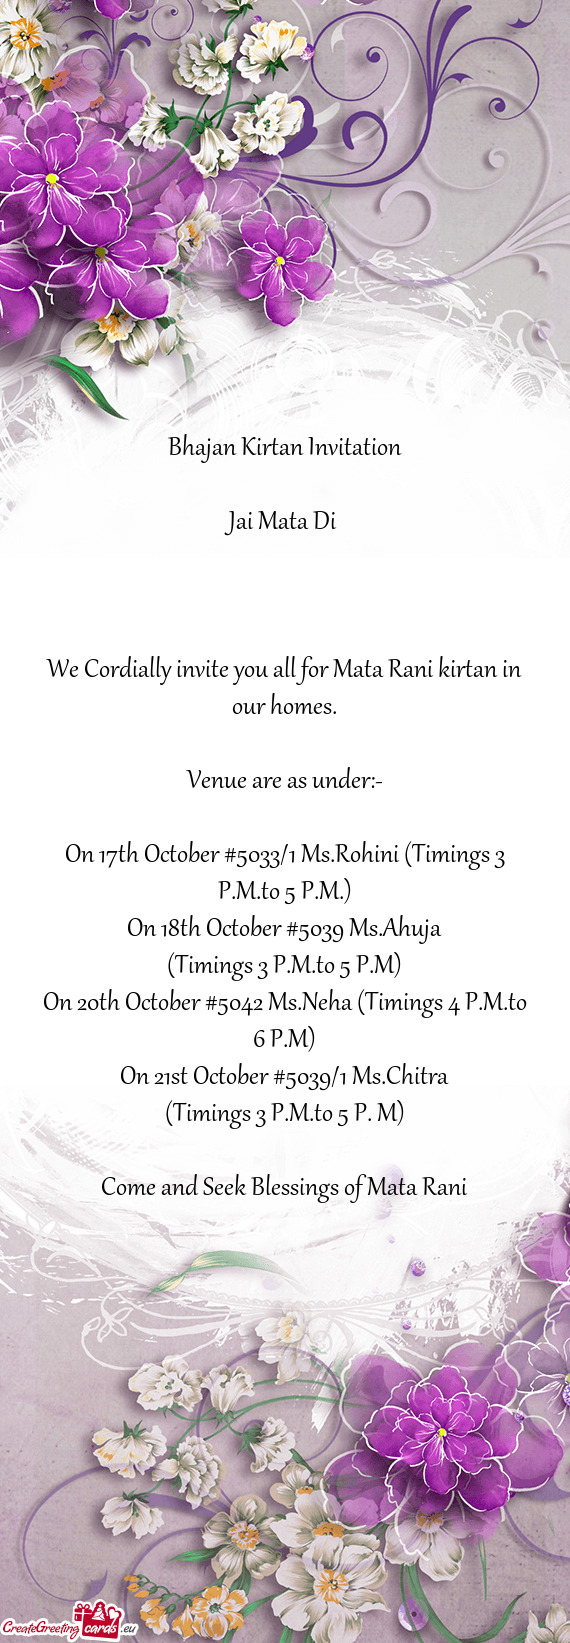 We Cordially invite you all for Mata Rani kirtan in our homes